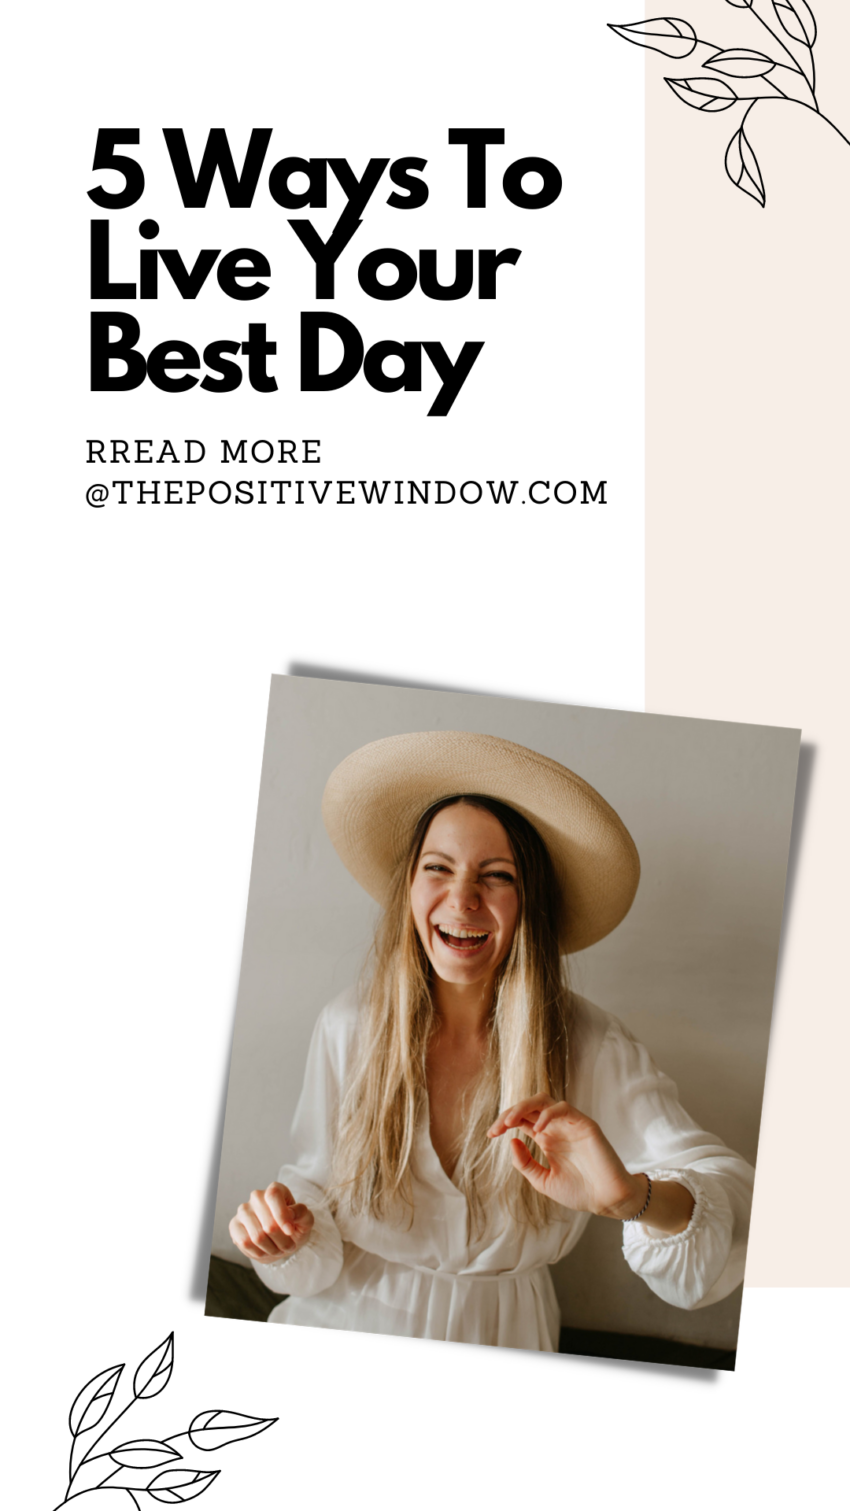 5 Ways To Live Your Best Day When Things Don't Go As Expected